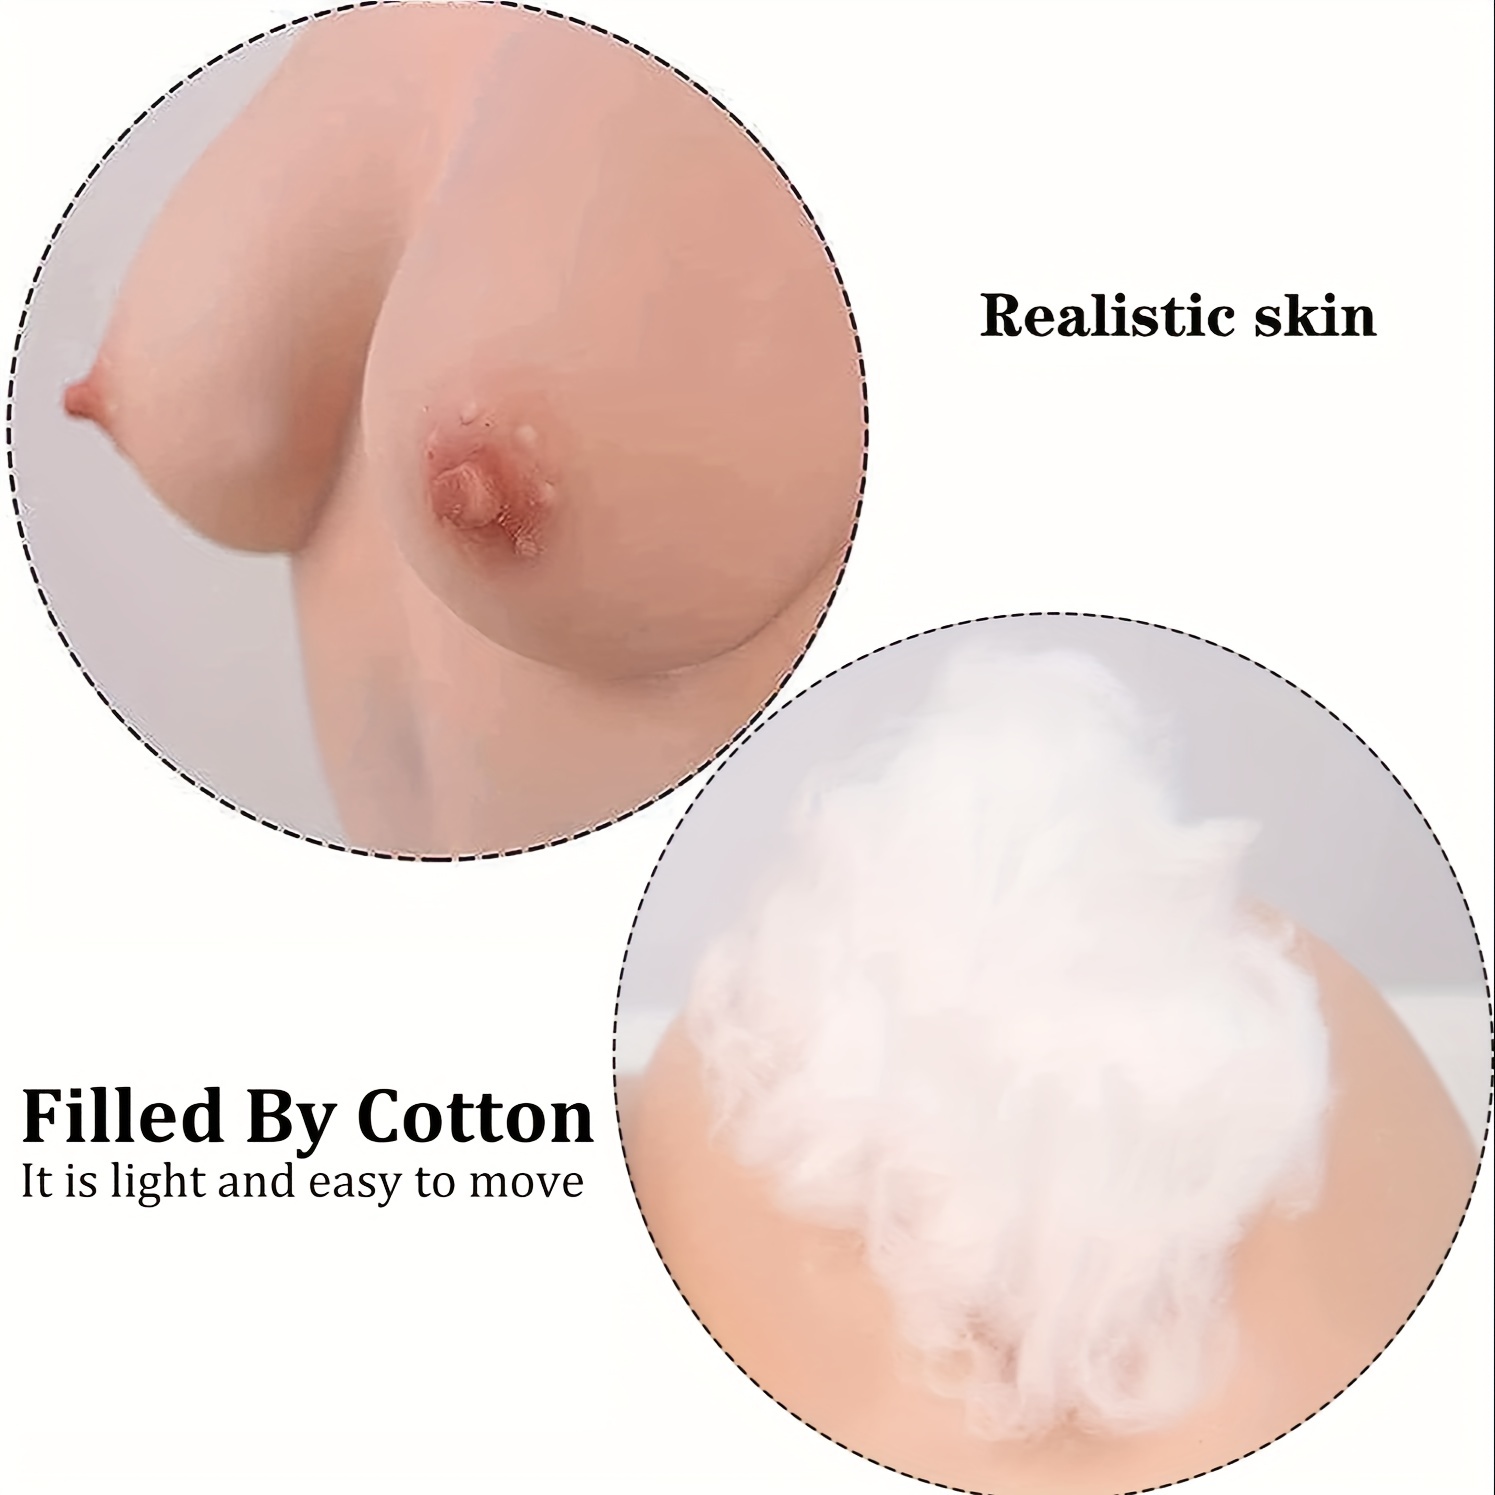 Silicone Breastplate Cotton Filled H Cup Realistic Fake Boobs